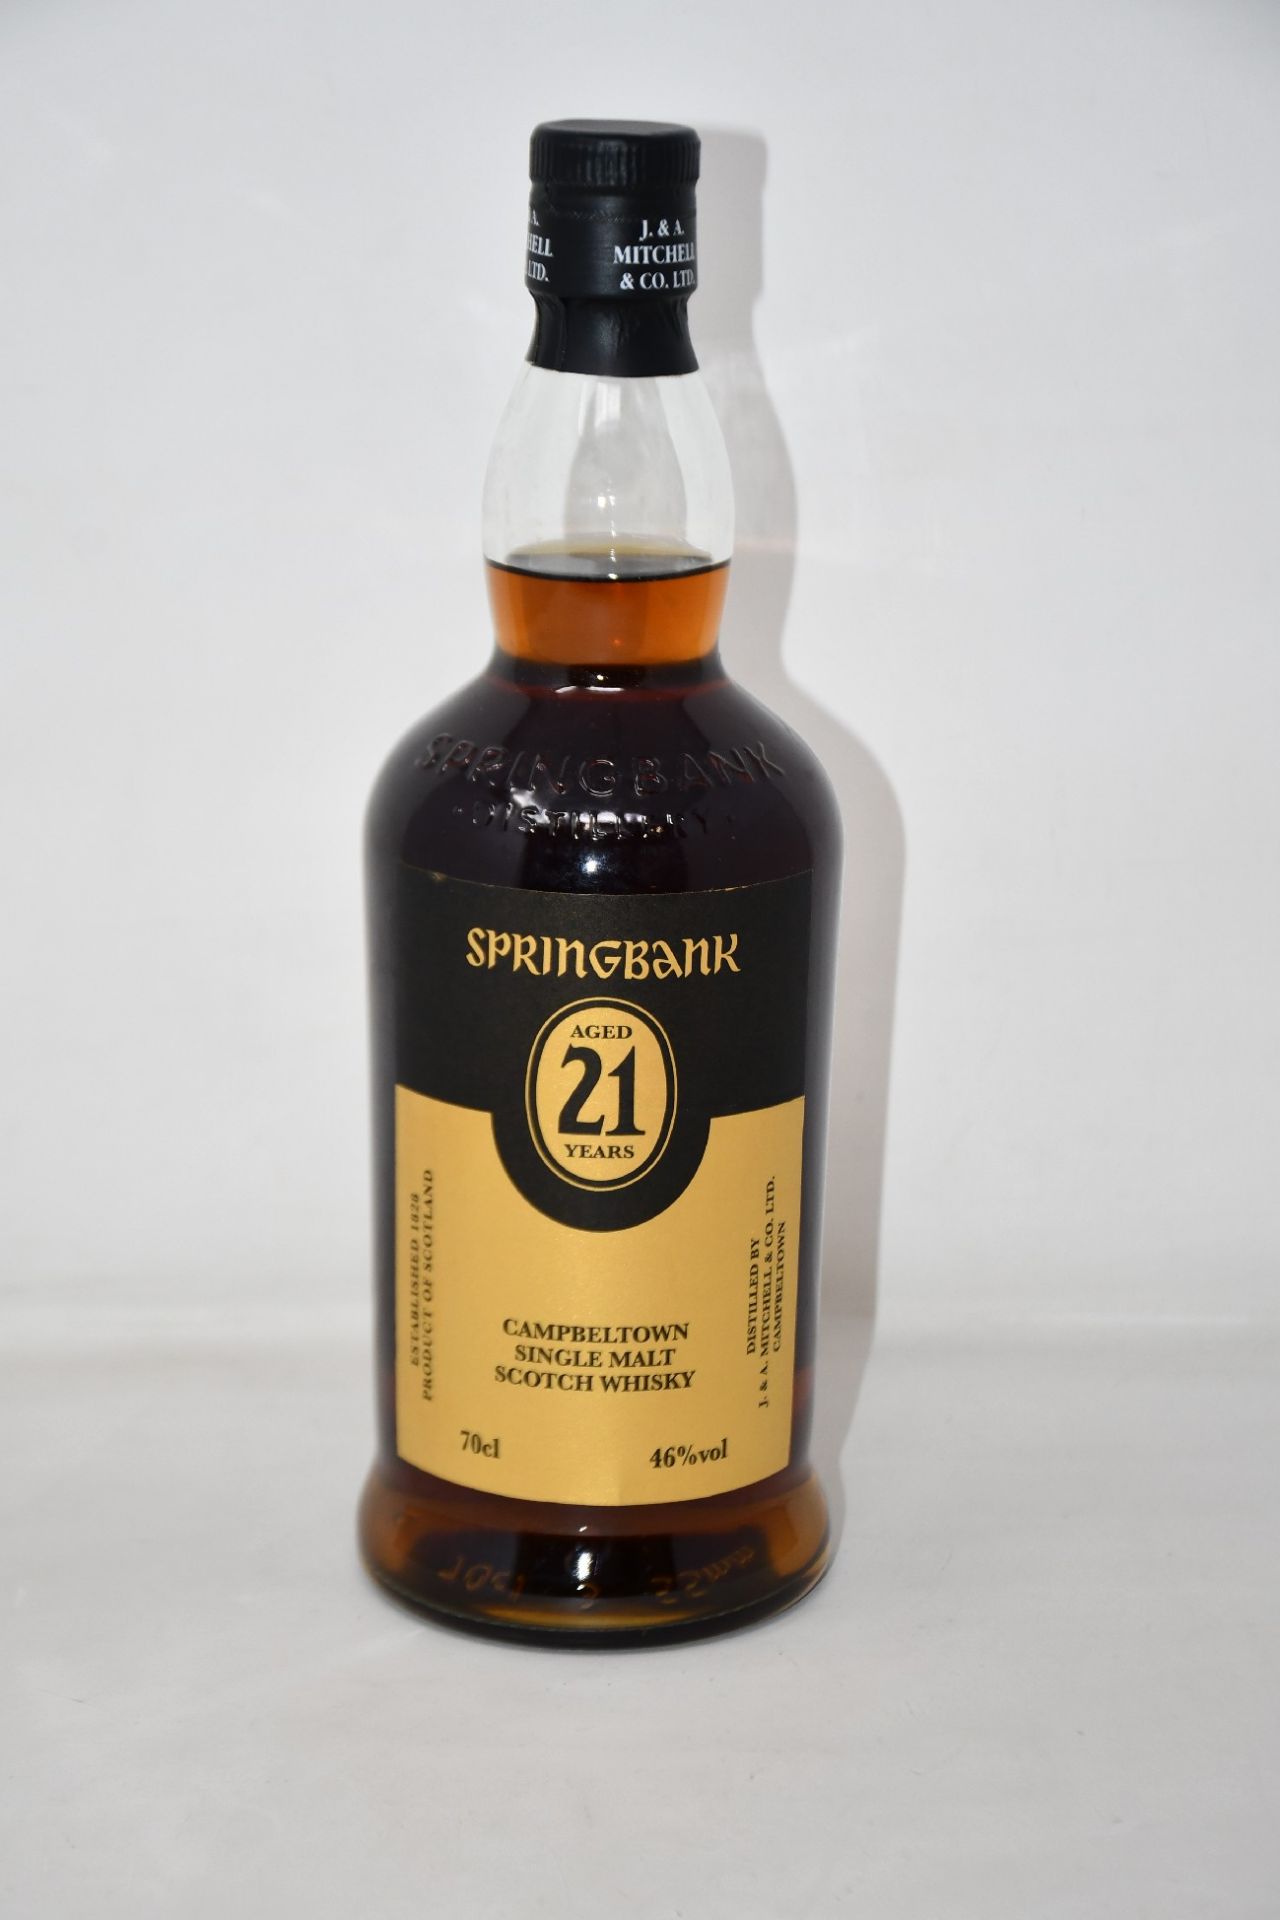 A bottle of Springbank Campbeltown single malt scotch whisky (Aged 21 years) (700ml) (Over 18s